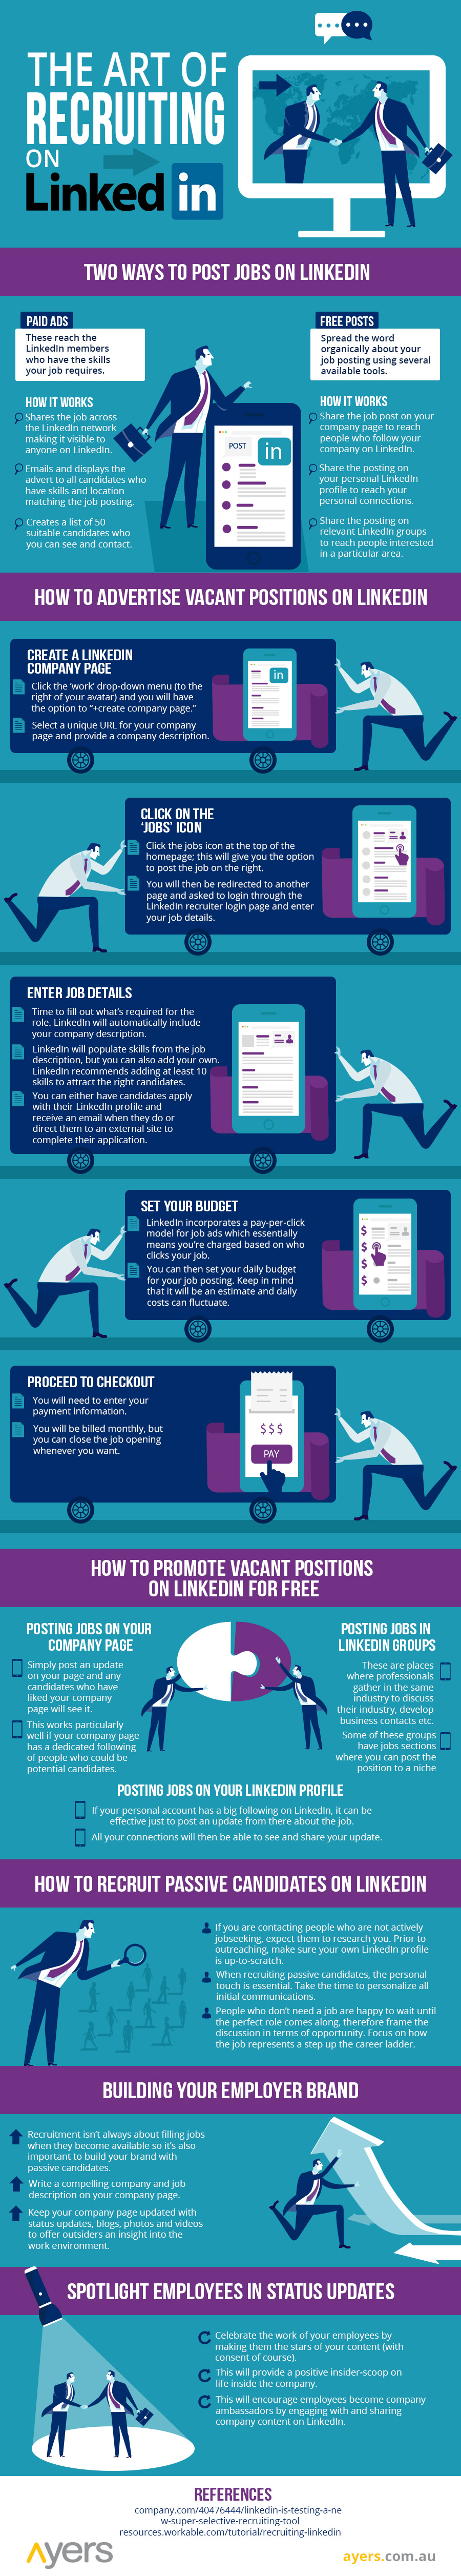 mastering the art of recruiting infographic